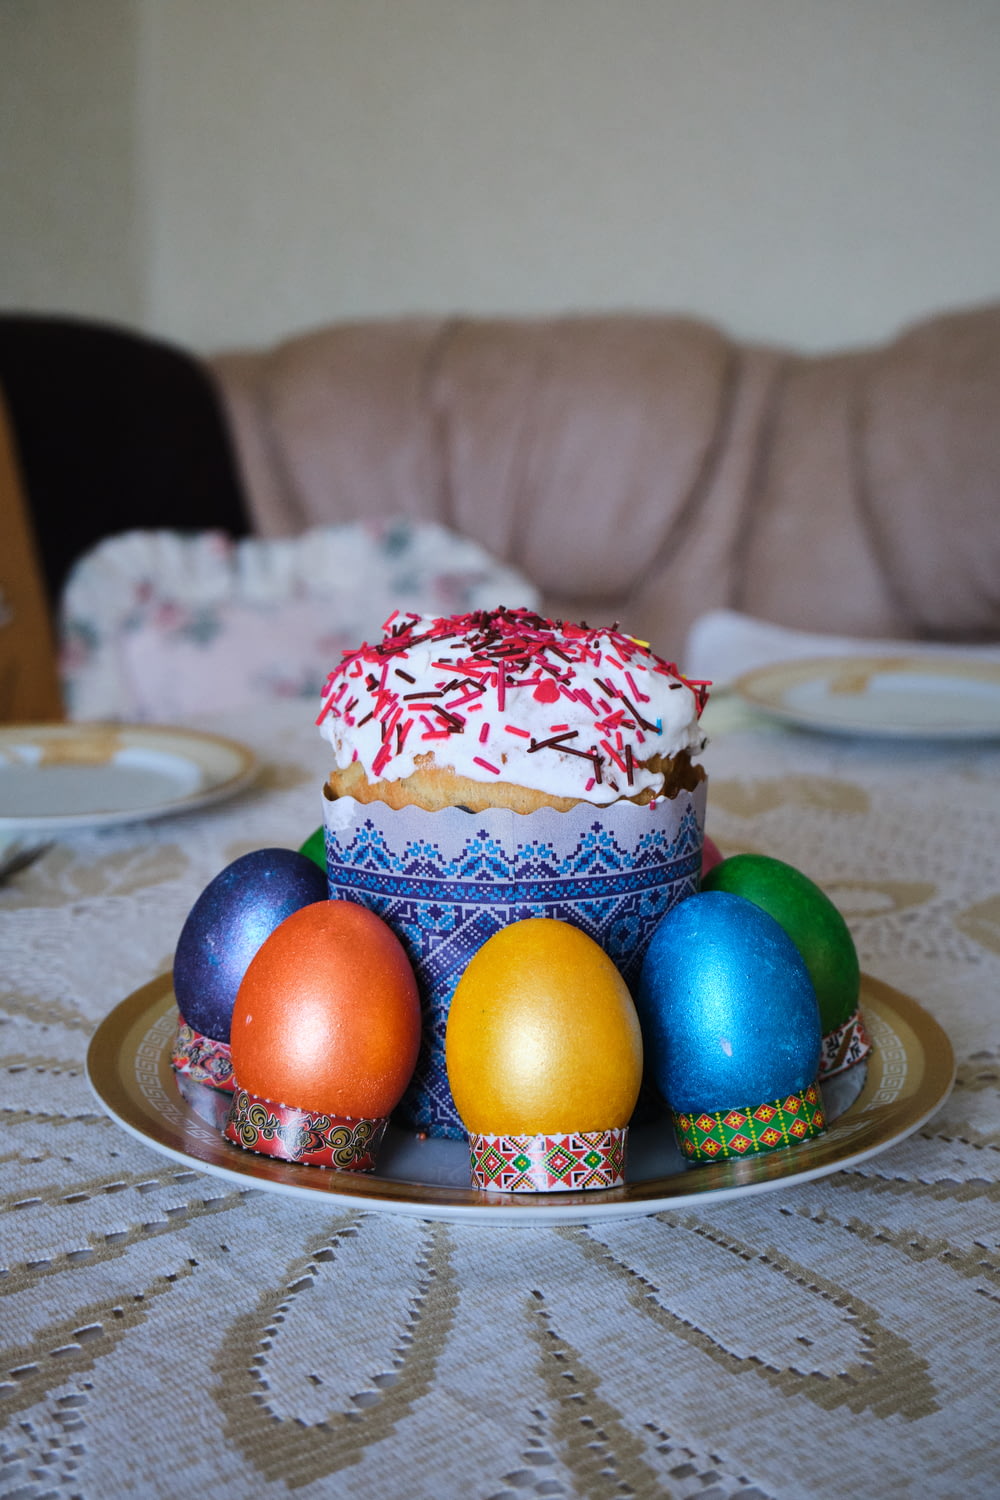 a plate of decorated eggs on a table